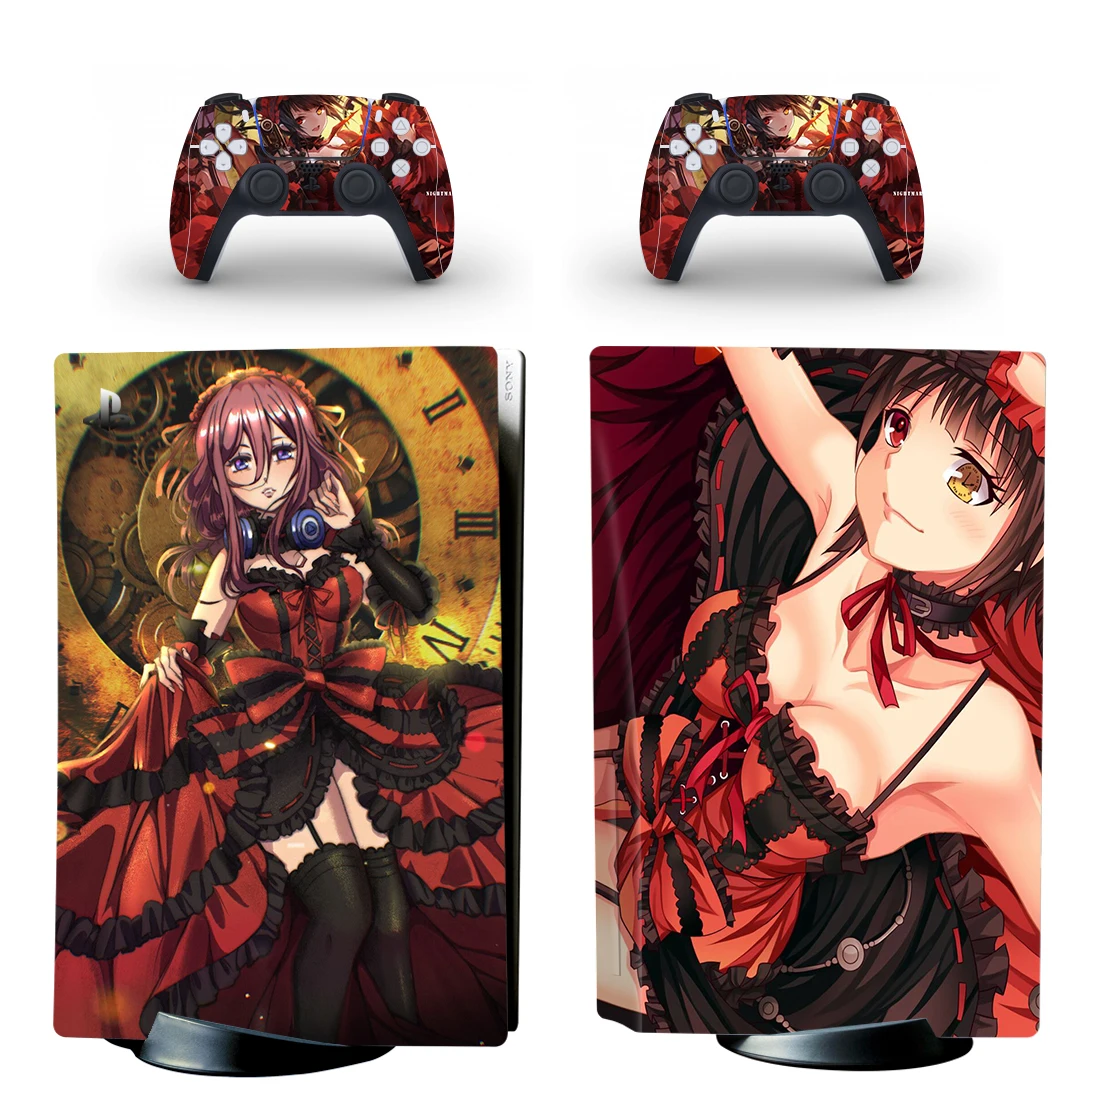 

Anime Cute Girl Tokisaki Kurumi PS5 Standard Disc Skin Sticker Decal Cover for PlayStation 5 Console & Controller PS5 Disk Skins